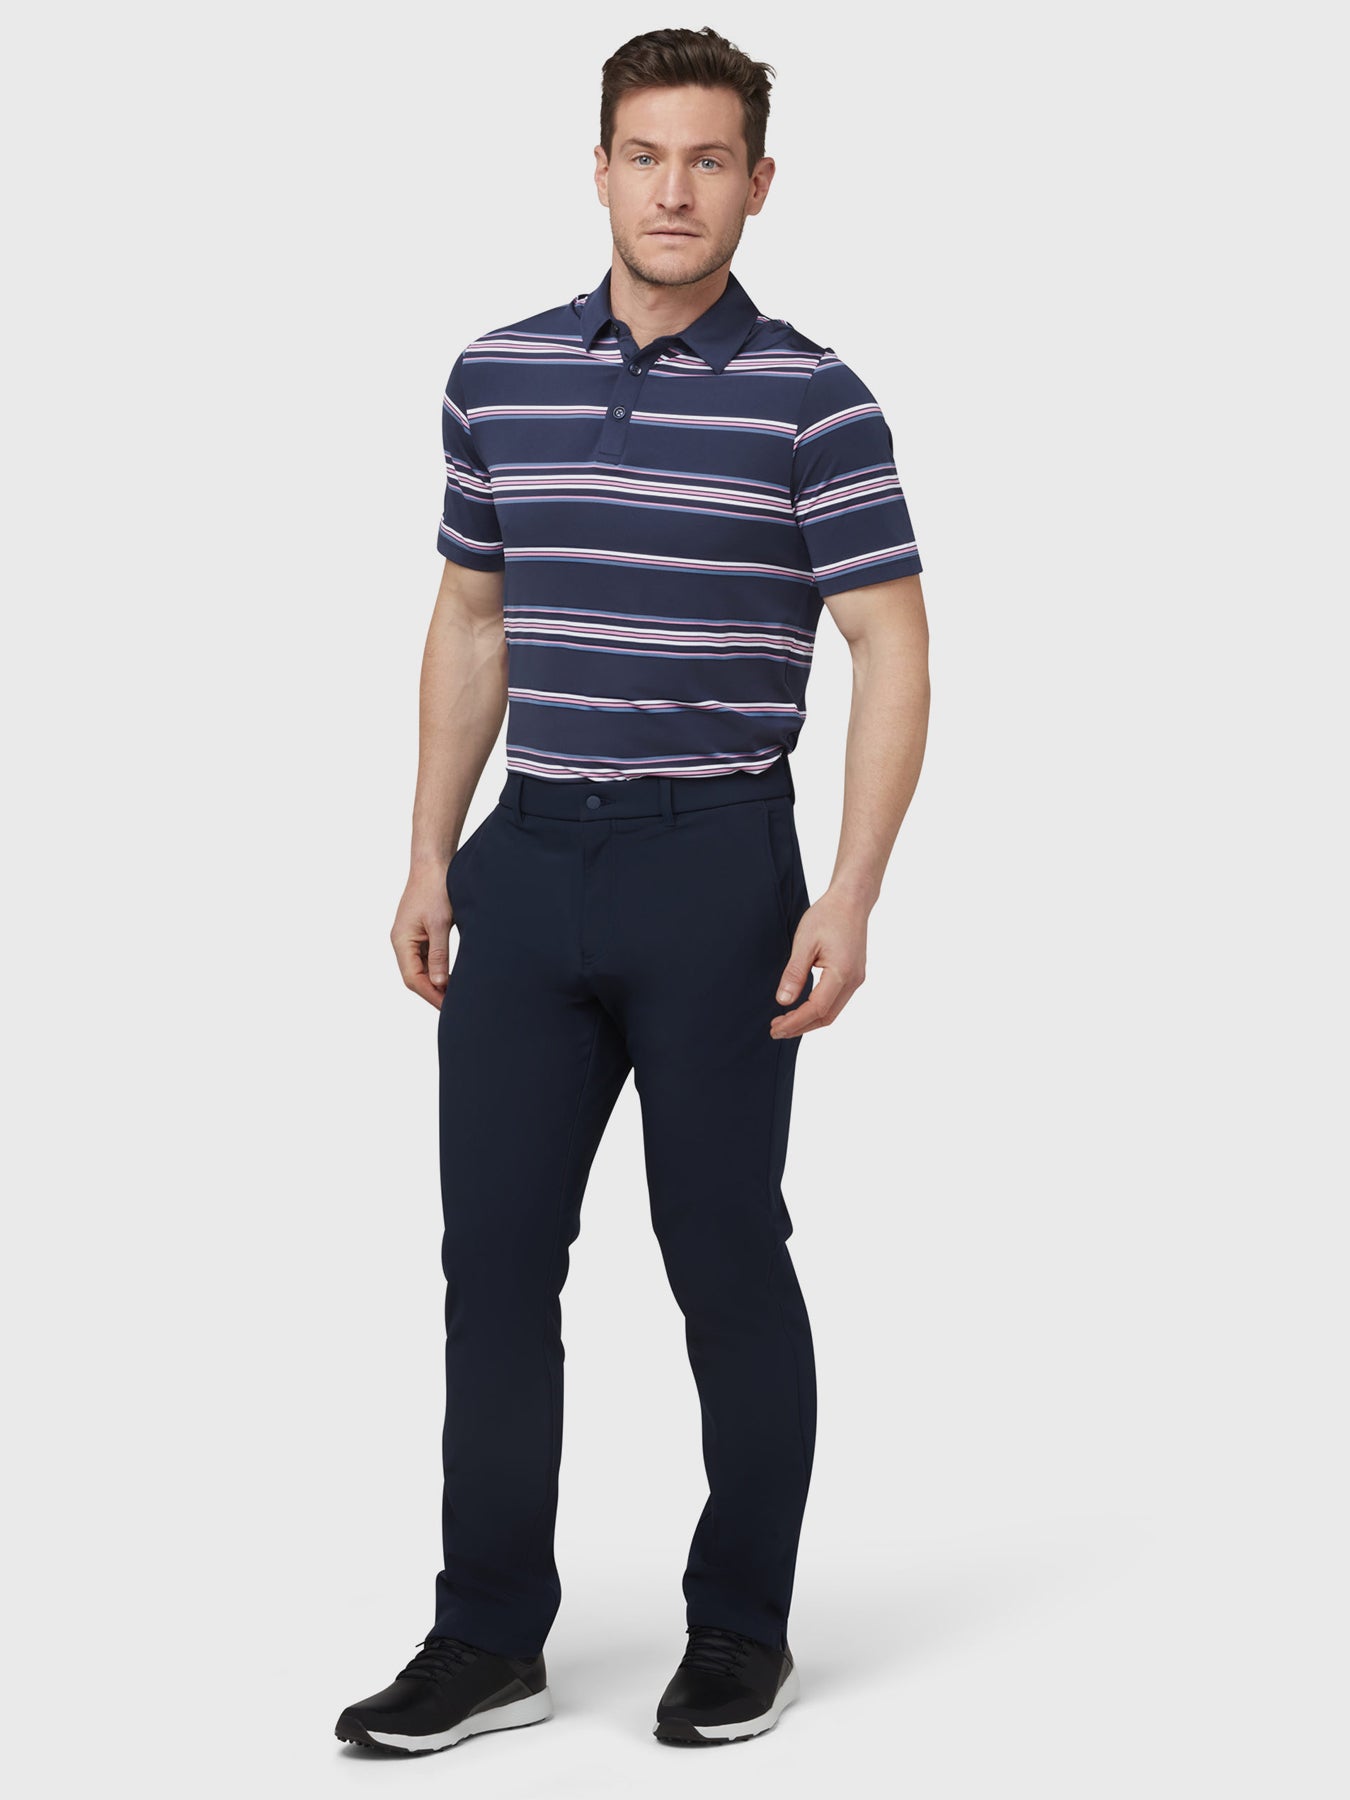 View Resort Ventilated Stripe Golf Polo In Peacoat Peacoat XXL information